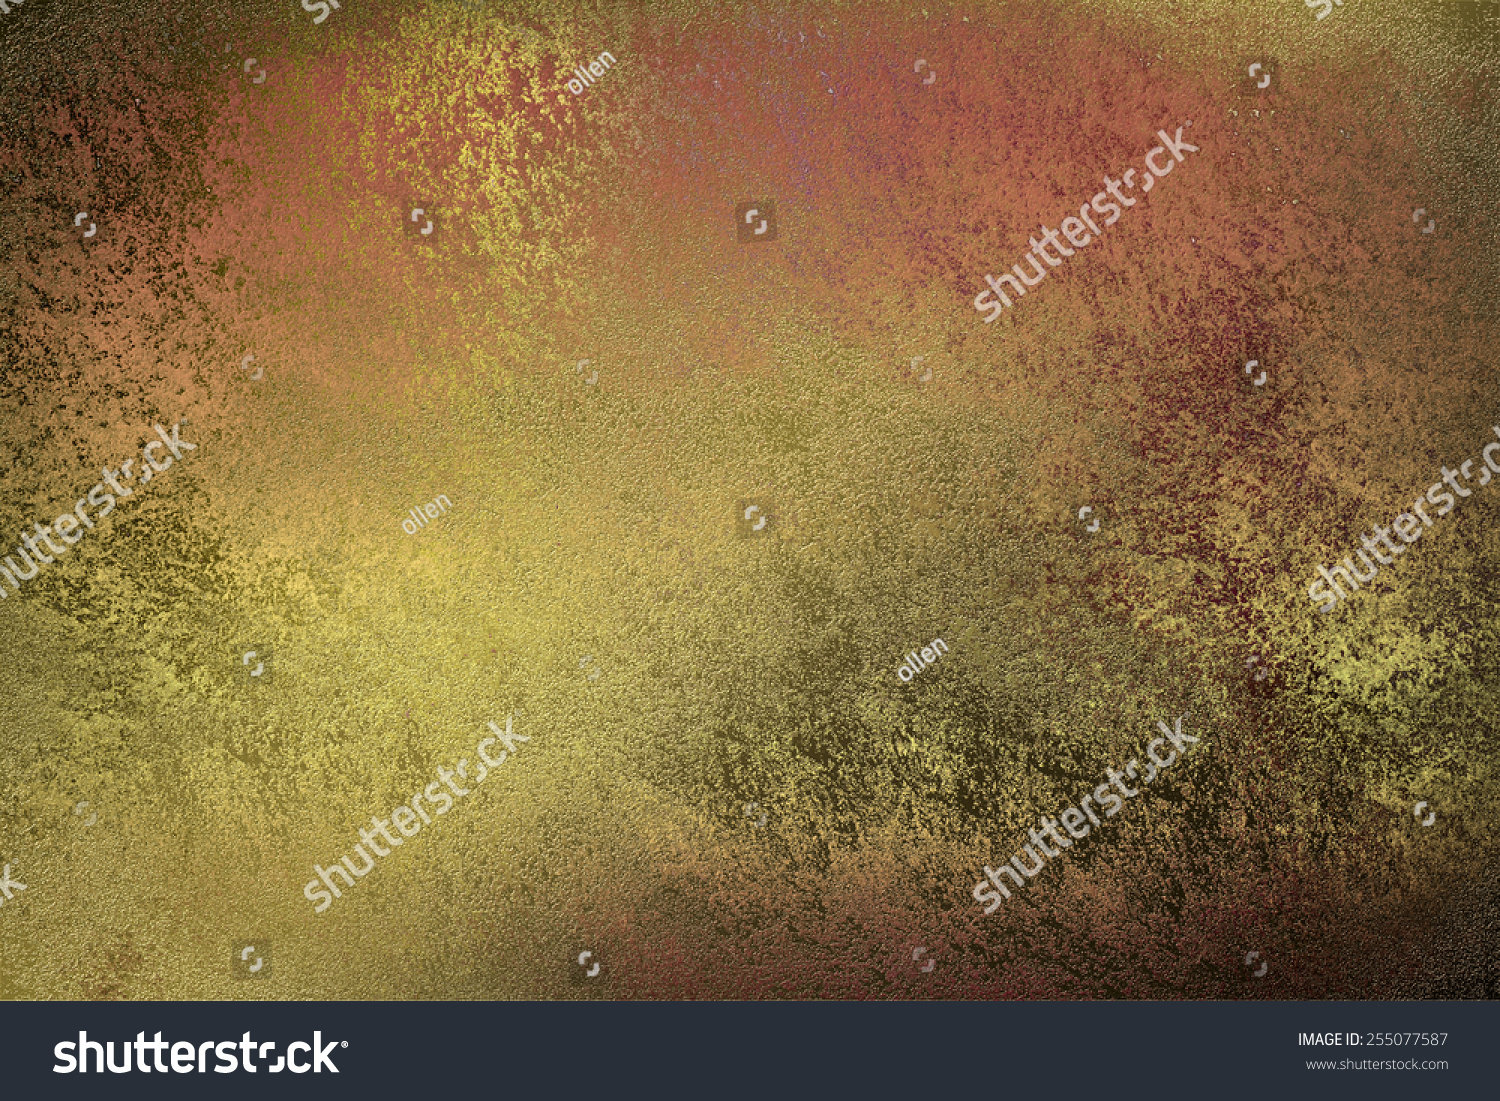 Brown Golden Abstract Background Painted Grunge Stock Illustration